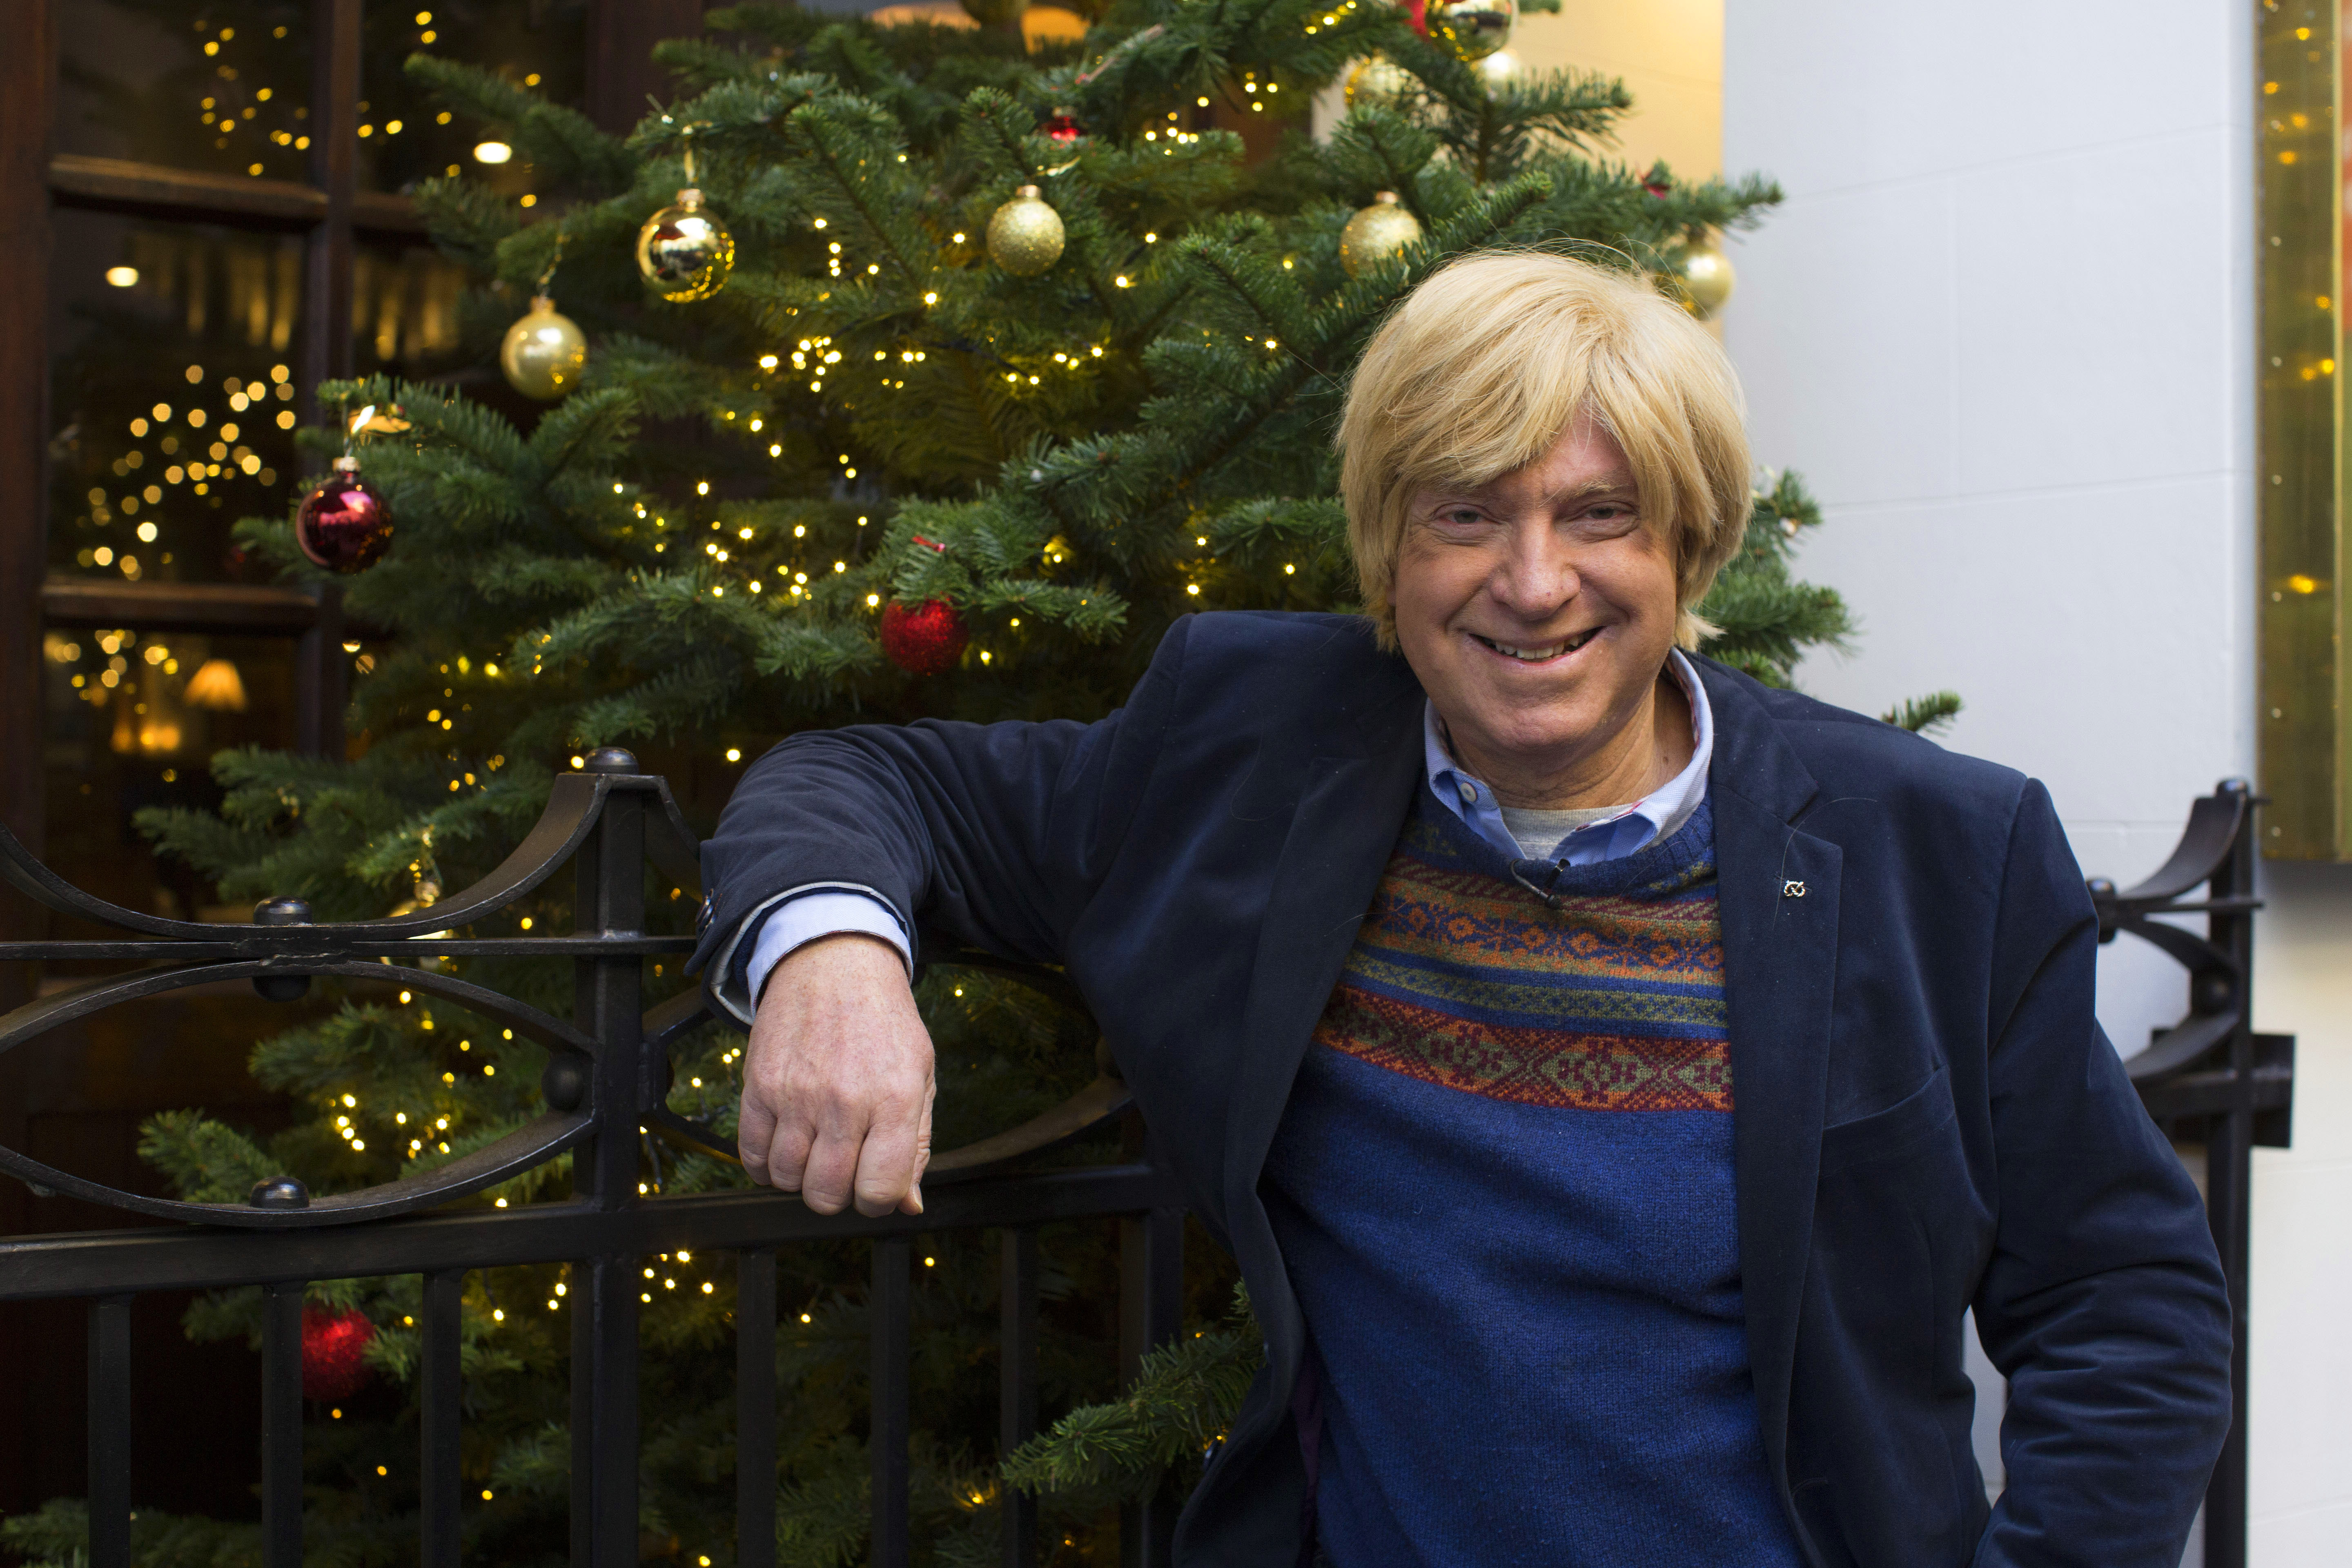 Michael Fabricant | Member of Parliament for the Lichfield Constituency5760 x 3840